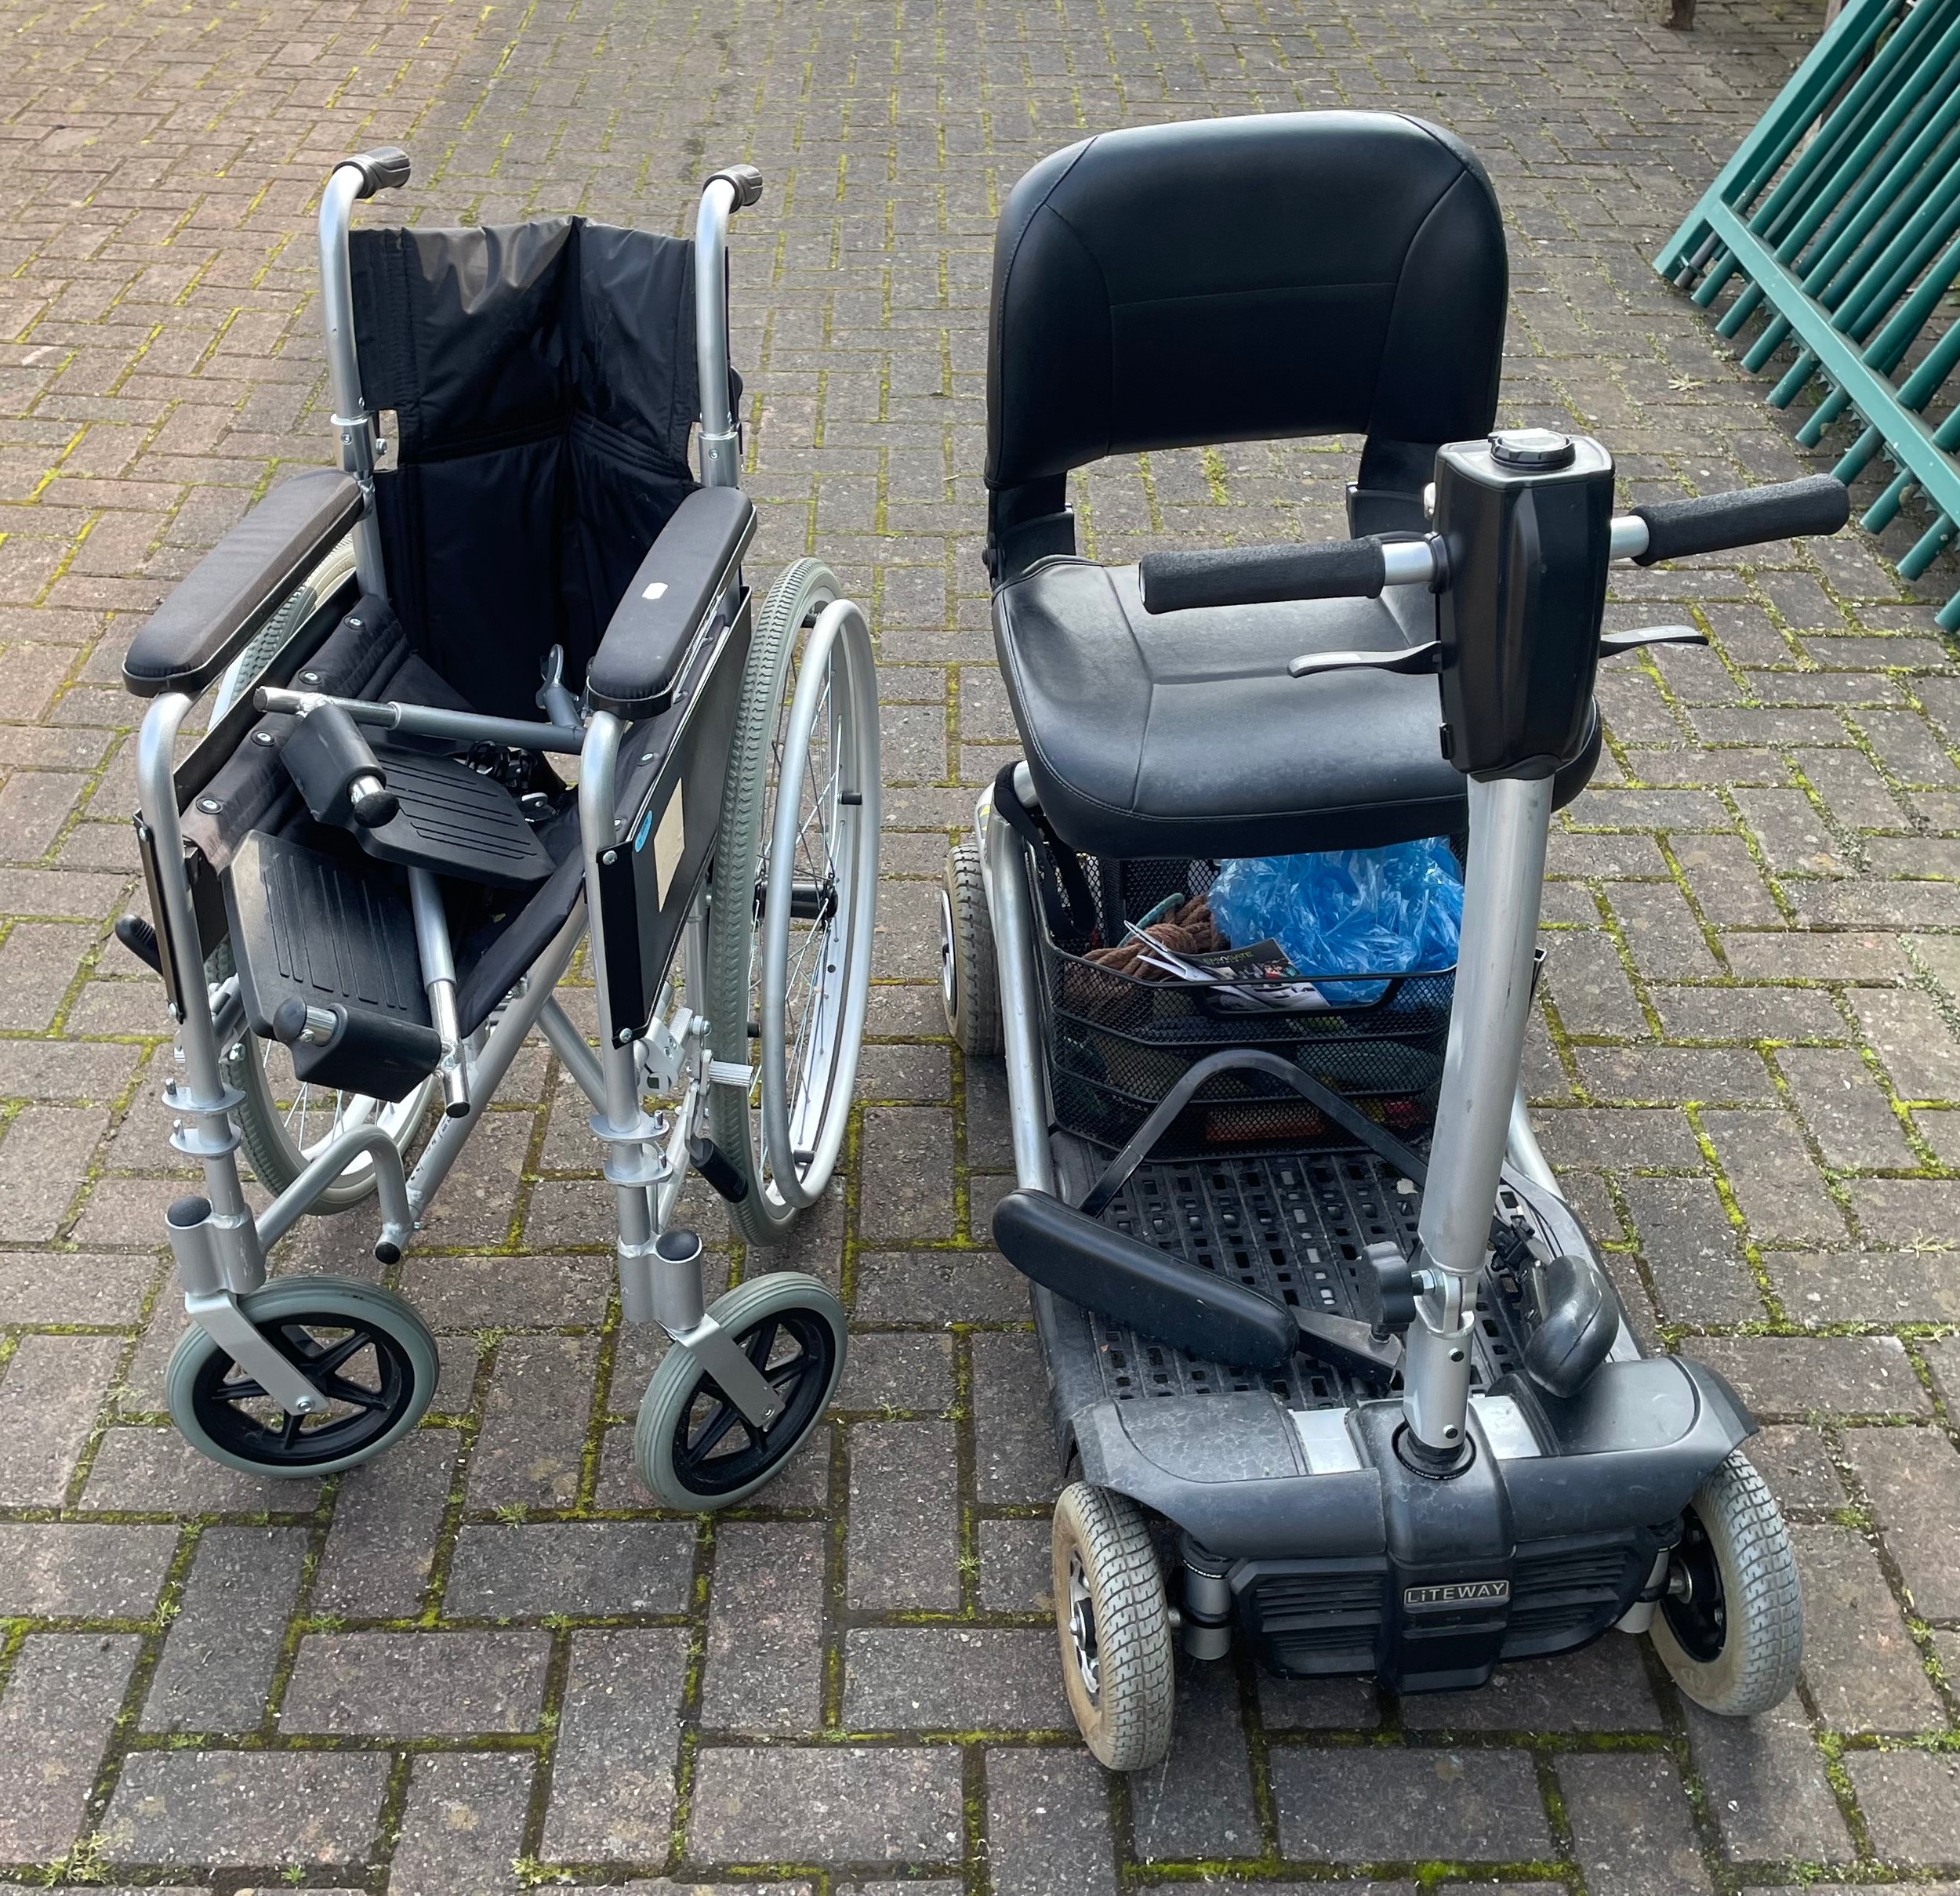 A Liteway folding mobility scooter, together with a folding wheelchair. (2)